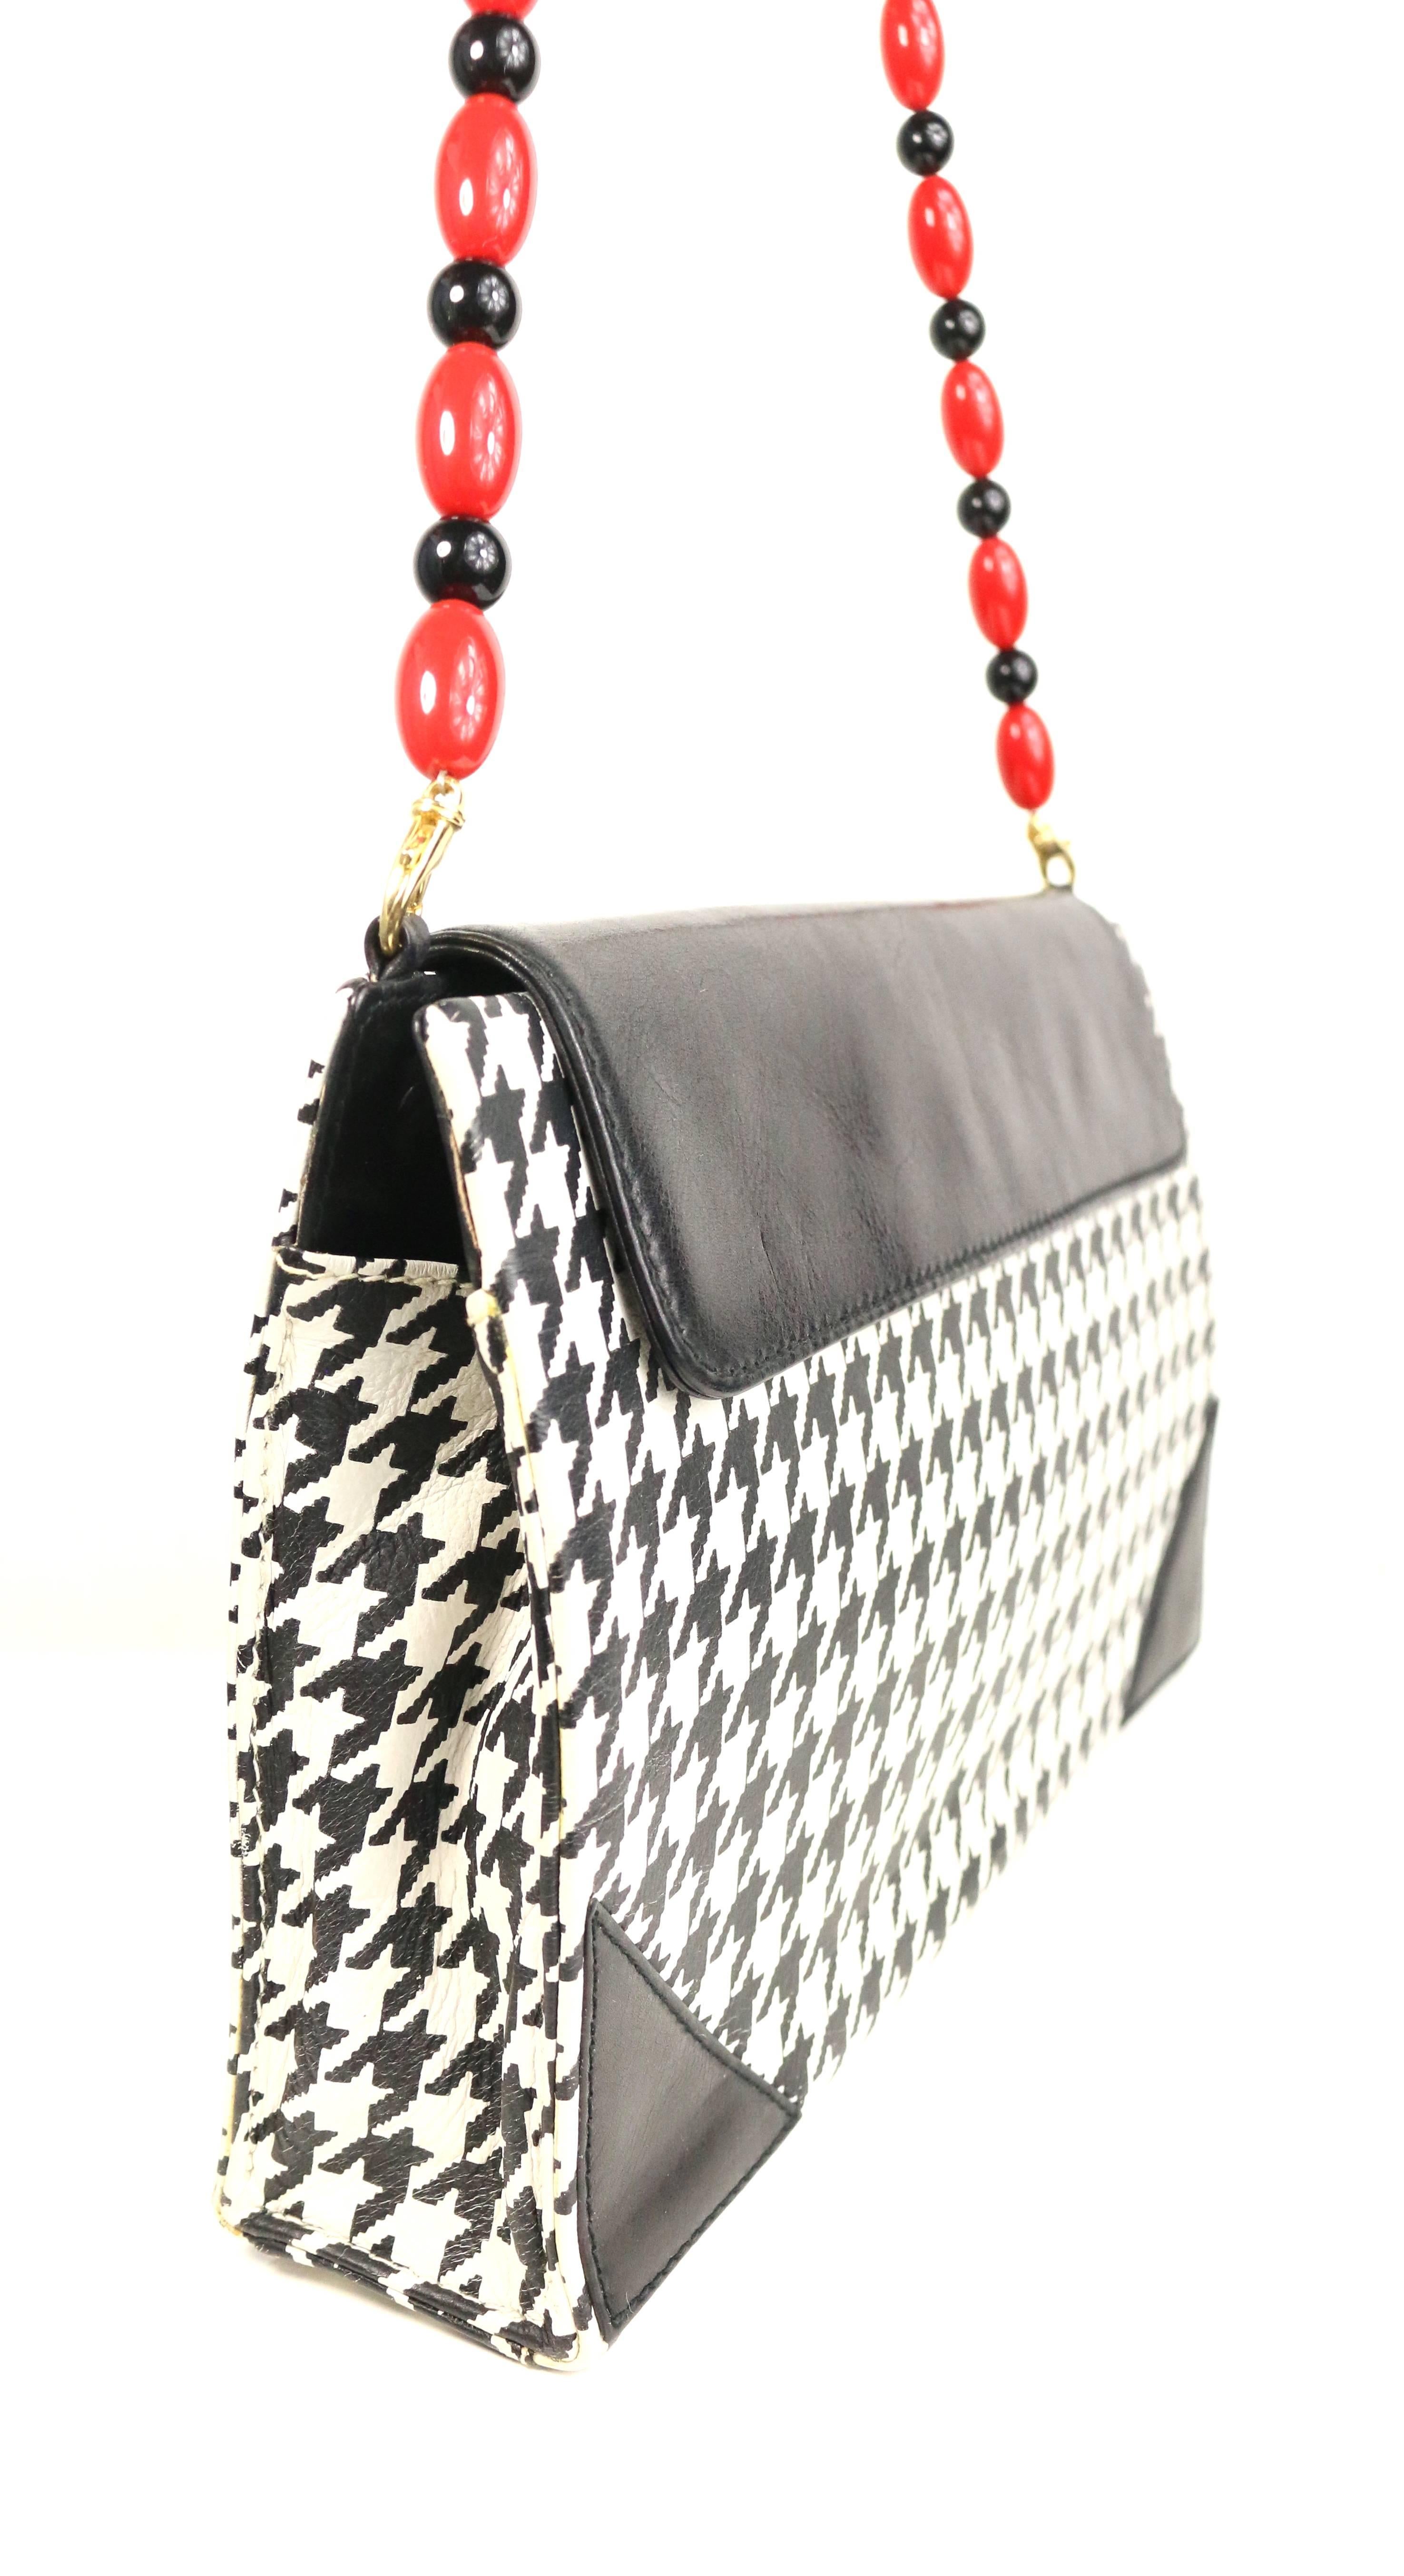 - Vintage 80s RoccoBarocco rectangle black and white shepherd's check small flap shoulder bag. Featuring a detachable black and red shoulder strap, one interior zipper pocket and one interior open pocket. 

- Made in Italy. 

- Length: 10.5 inches.